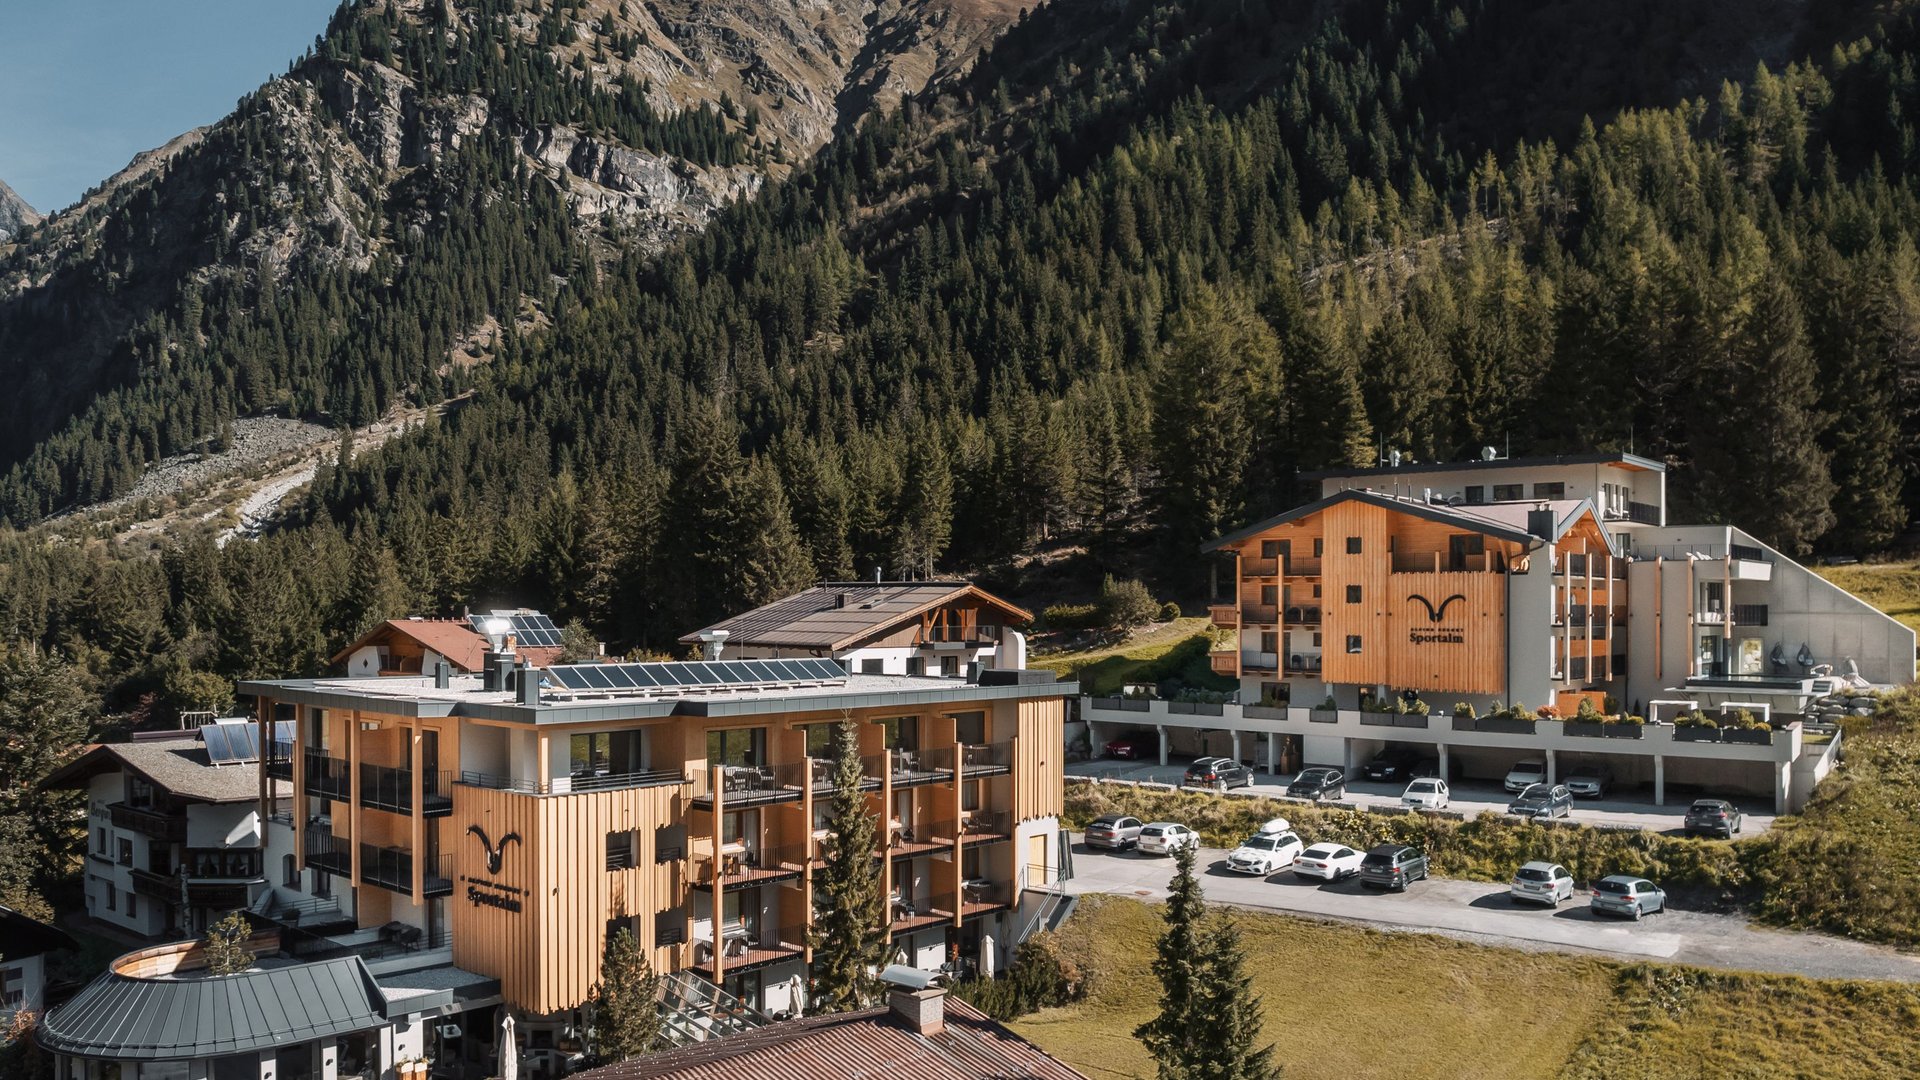 Our family-run hotel in Pitztal